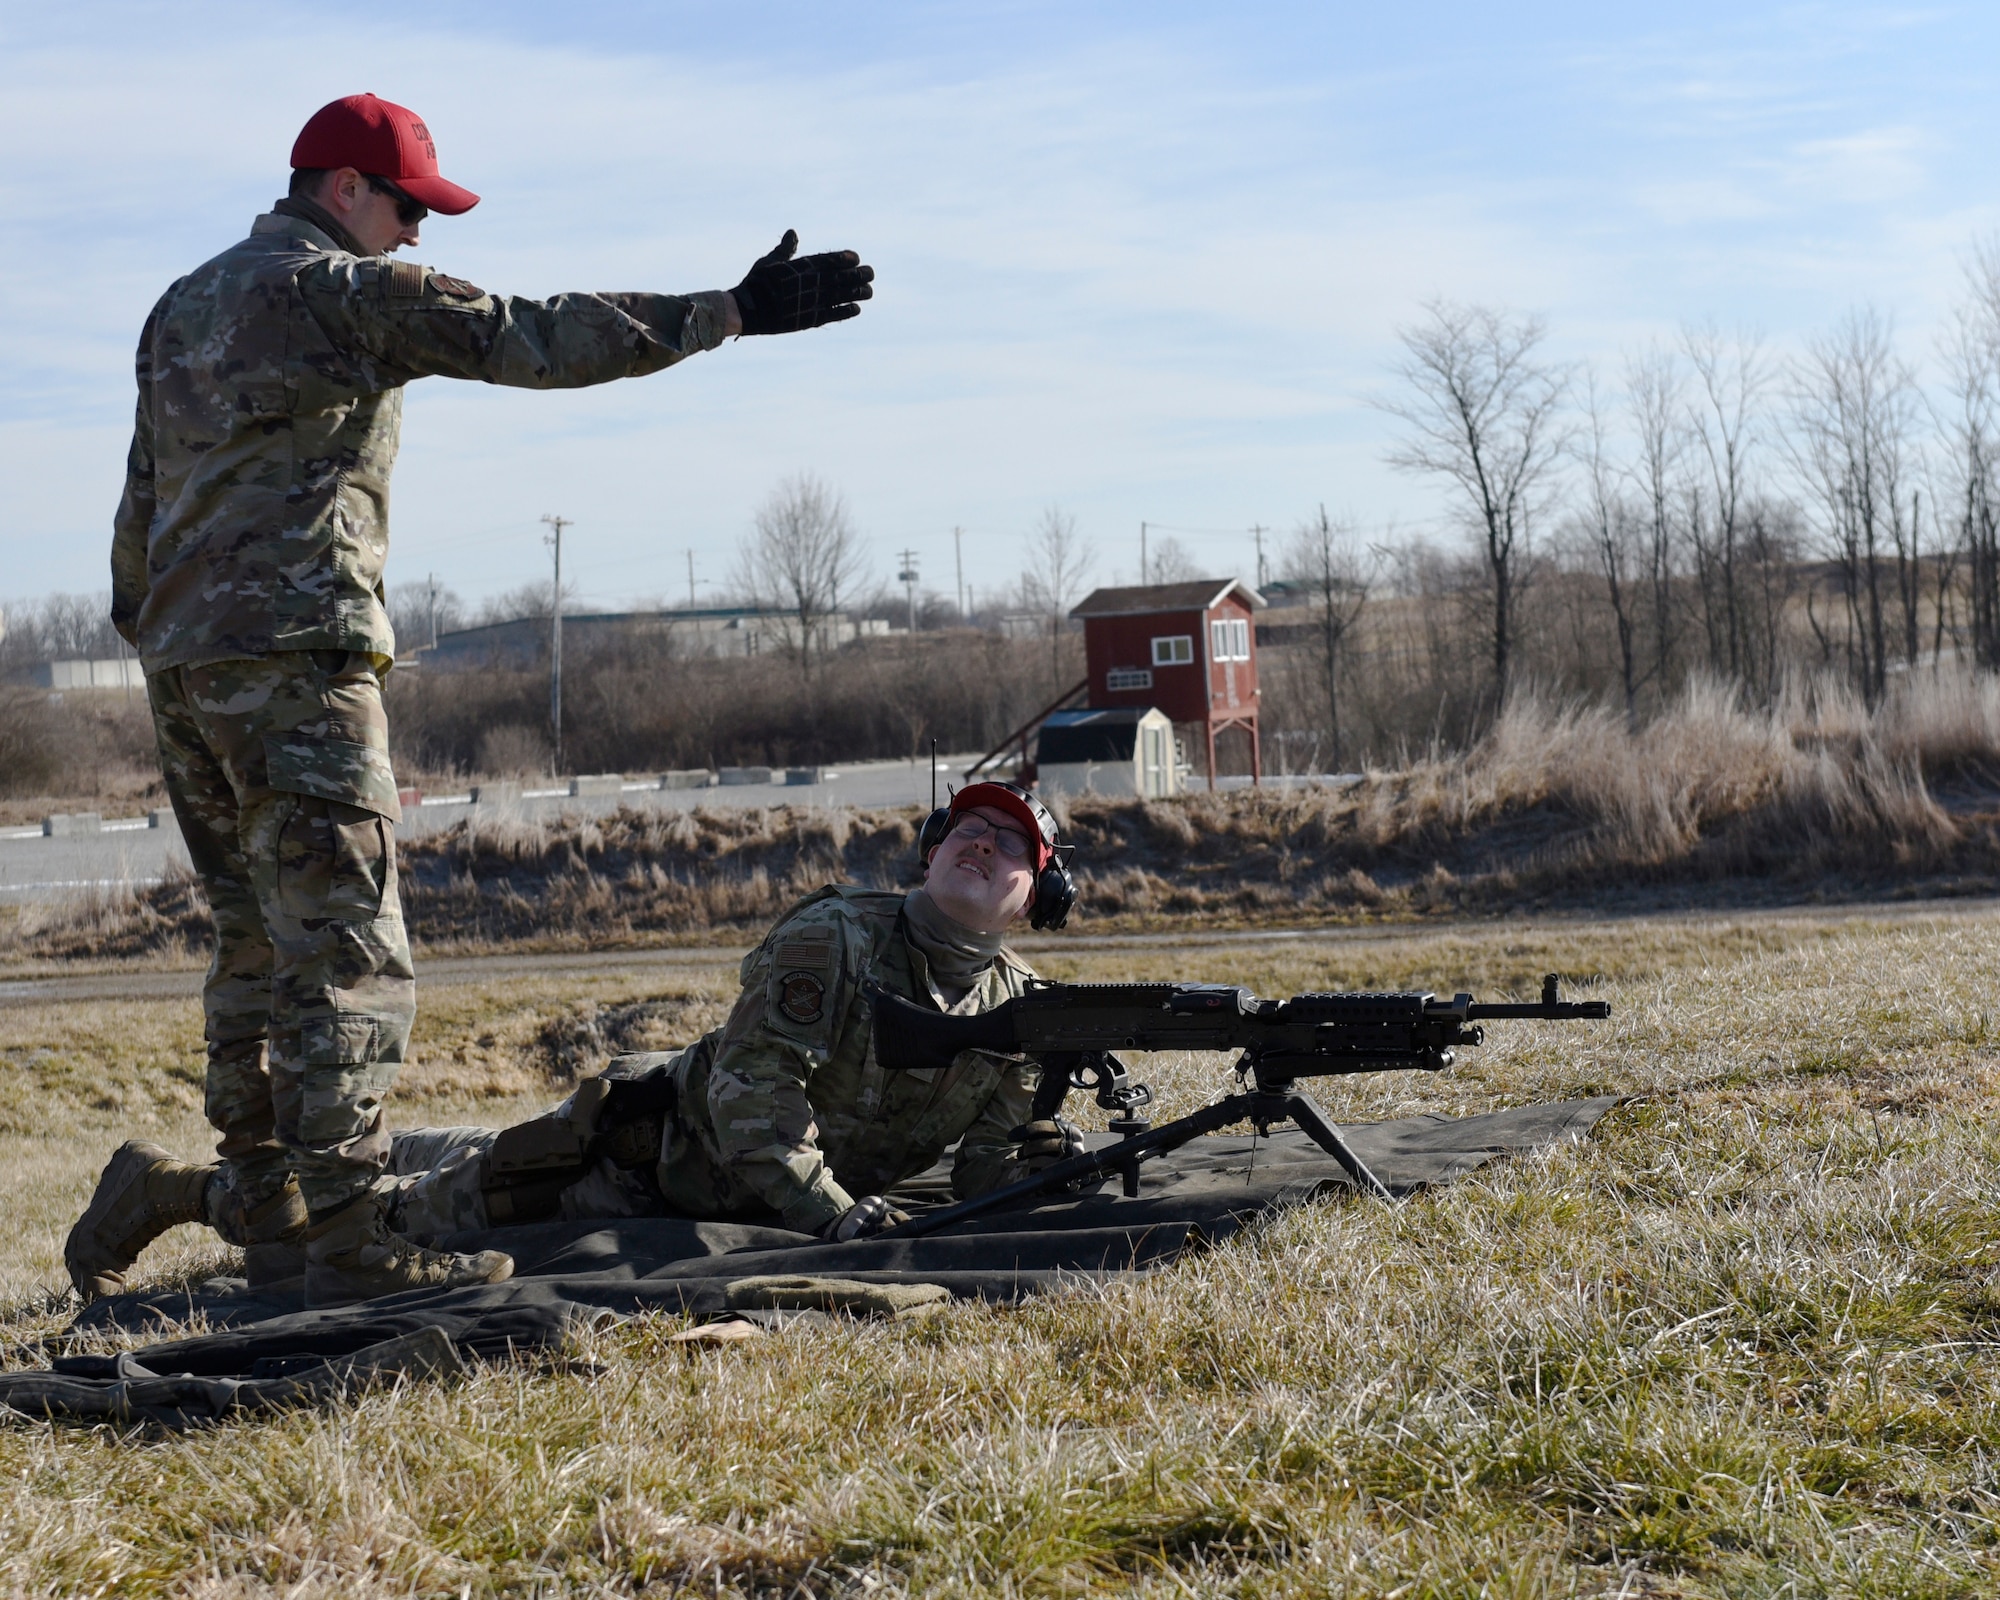 Air Force Staff Sgt. Sawyer McIntyre, left, an 88th Security Forces Squadron combat arms instructor, talks with Senior Airman Clayton Nyp, an 88th SFS combat arms instructor, who is sighting an M240B machine gun at Camp Atterbury in Edinburgh, Indiana, on Feb. 25, 2021. The 88th SFS combat arms instructors, from Wright-Patterson Air Force Base, Ohio, travel to Camp Atterbury multiple times each year for readiness and qualification training with deployers on machine guns and grenade launchers. (U.S. Air Force photo by Ty Greenlees)